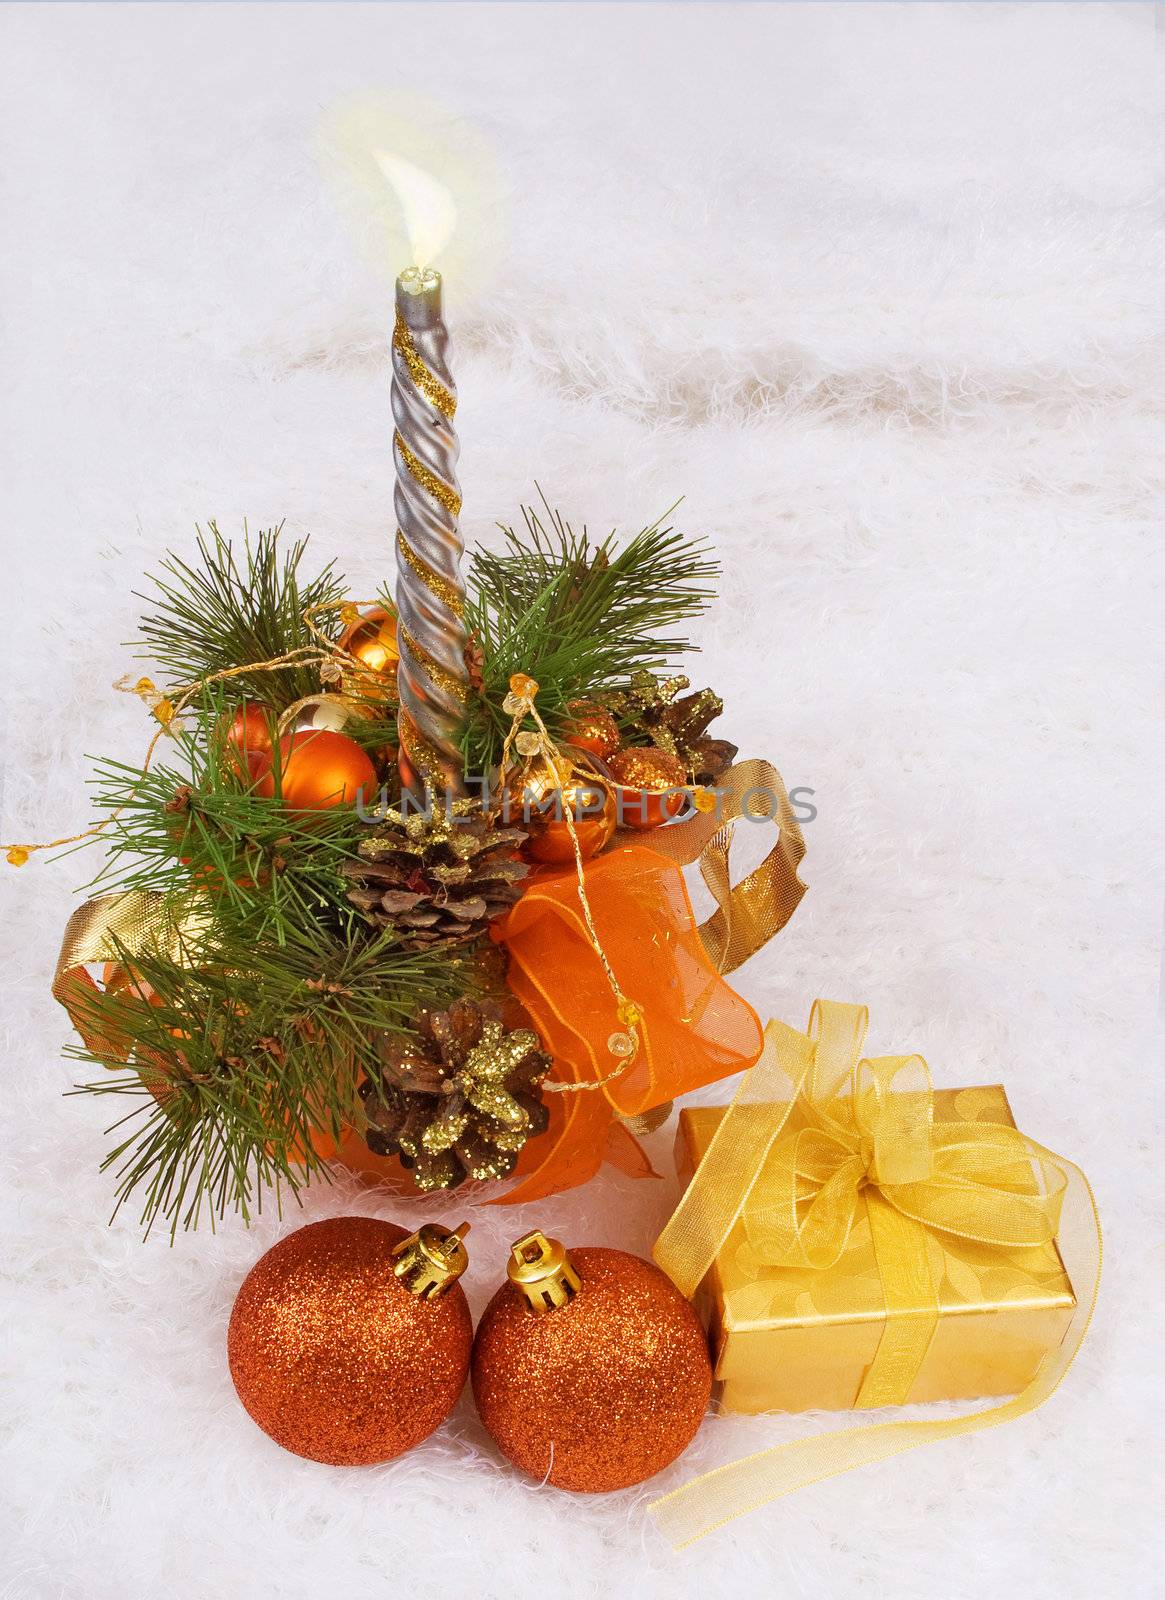 Christmas silver candles and golden box and spheres on white fur